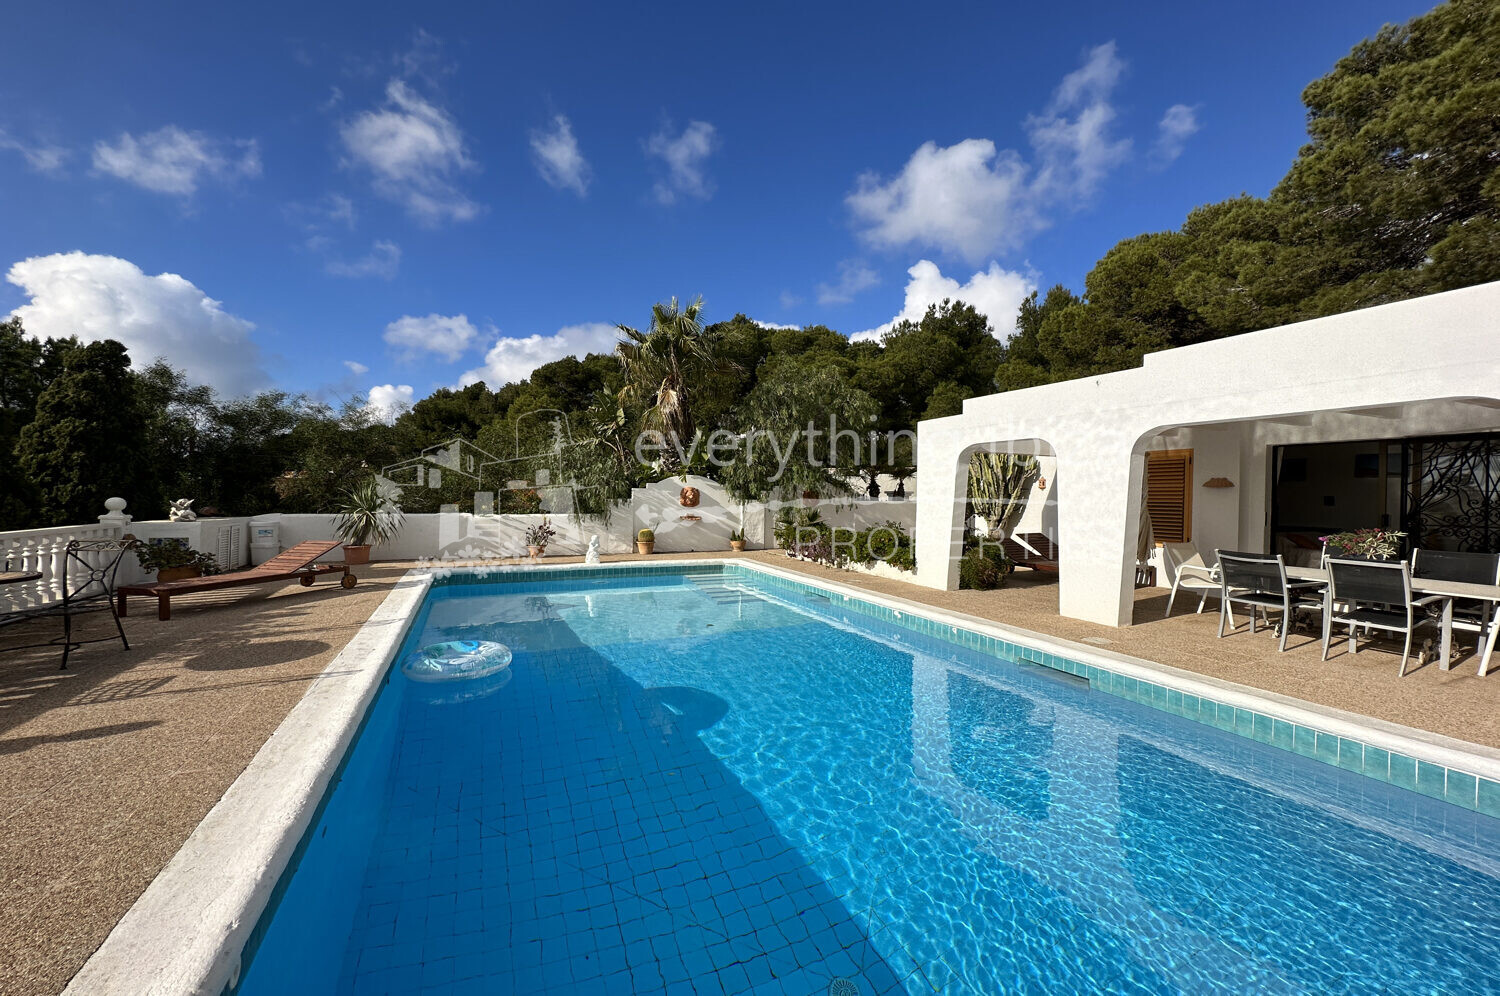 Charming Traditional Villa with Extra Plot & Views of Es Vedra, ref. 1521, for sale in Ibiza by everything ibiza Properties